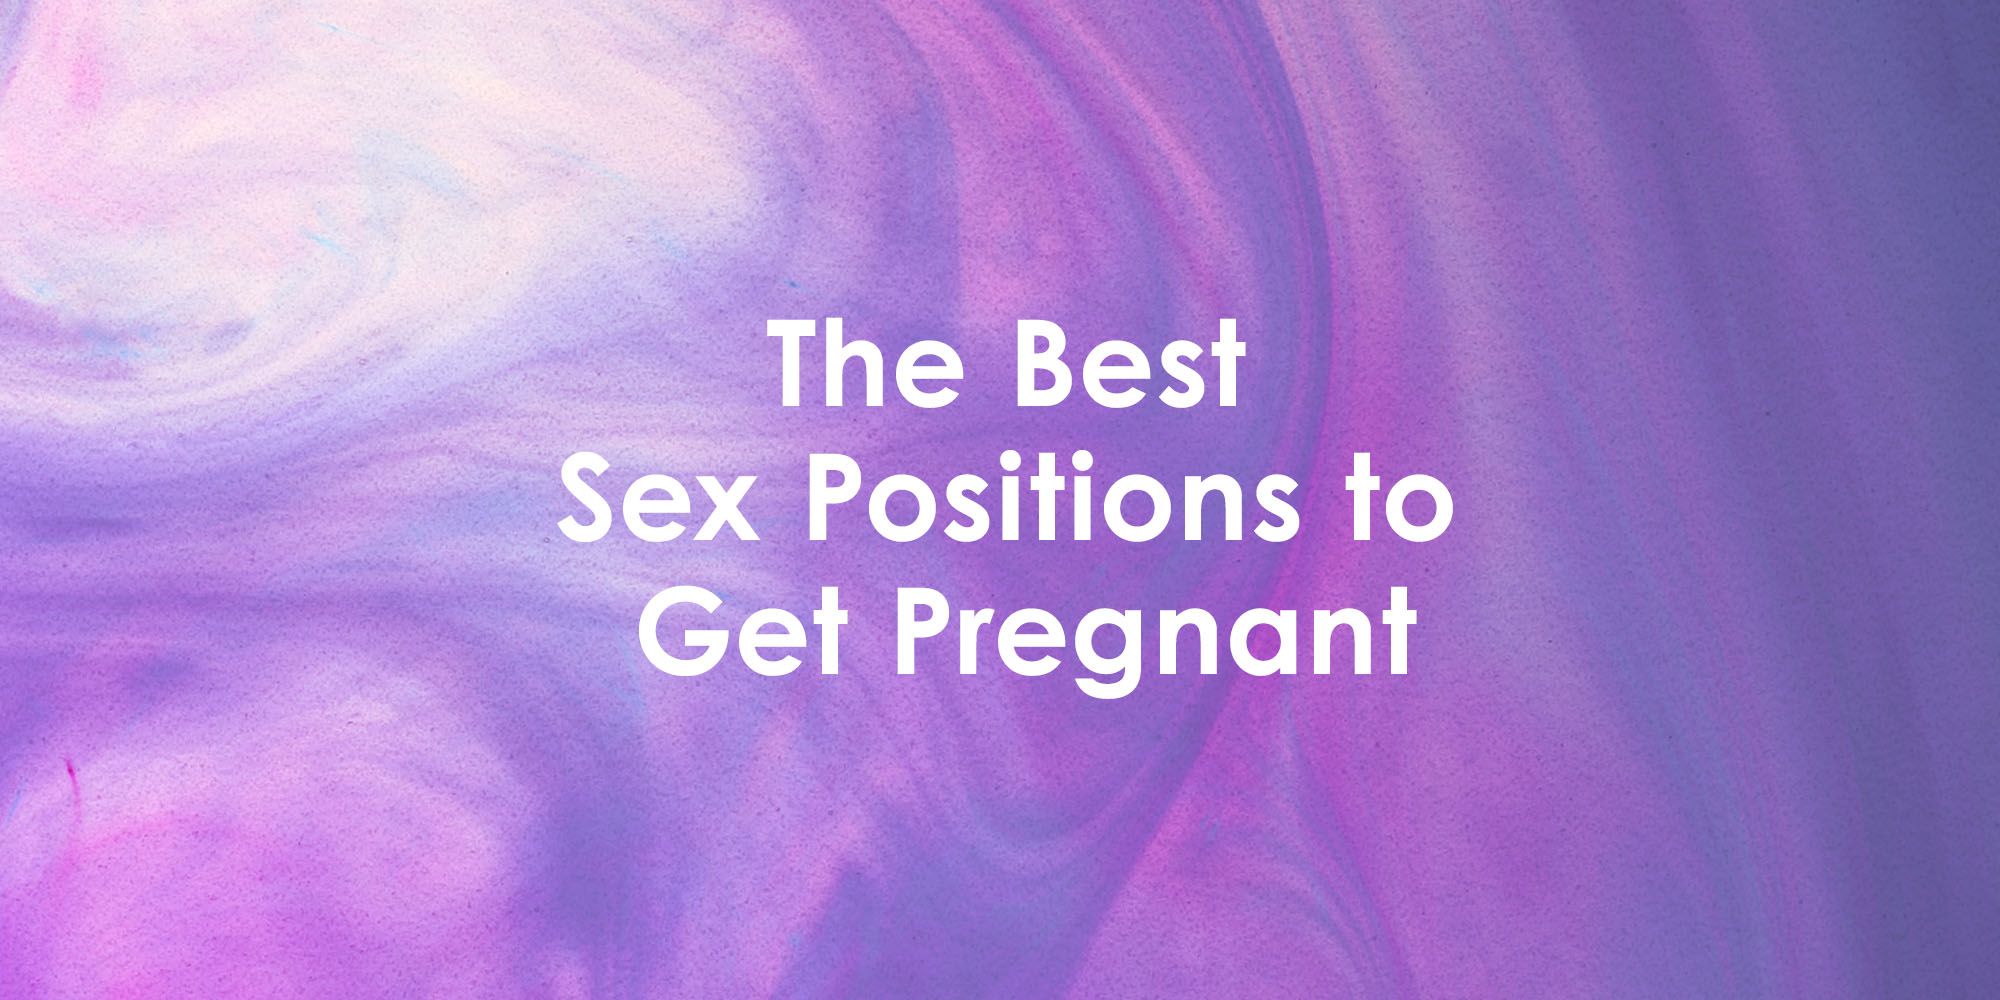 Sex Positions Sure to Get You Pregnant - Best Sex Positions to Get Pregnant